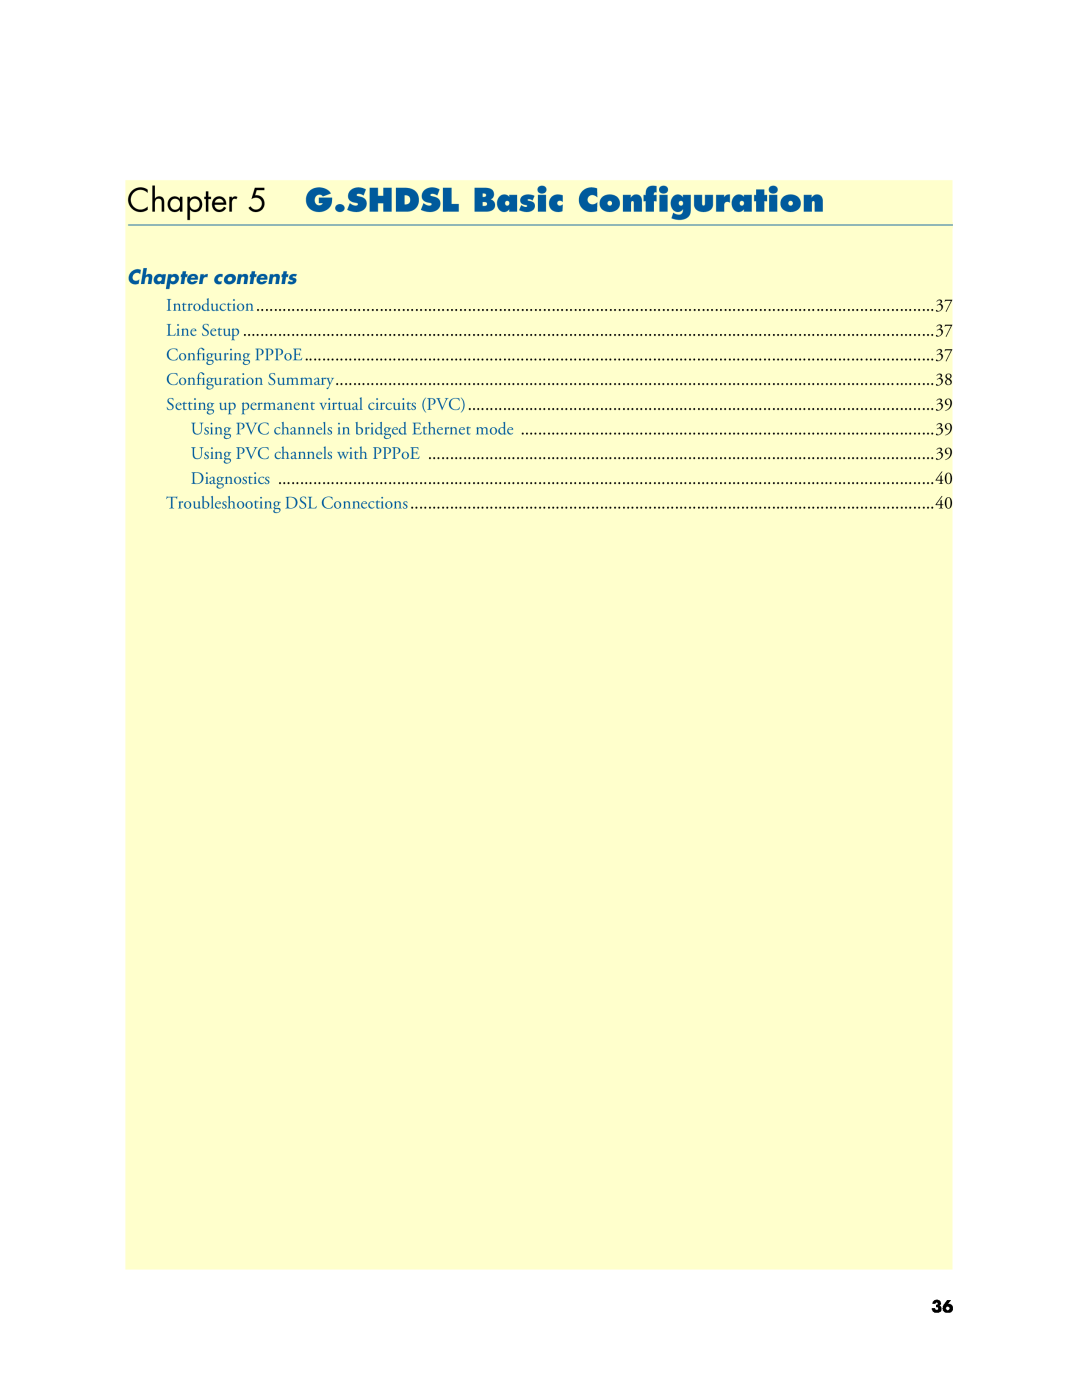 Patton electronic 4950-NCE manual G.SHDSL Basic Configuration, Chapter contents 